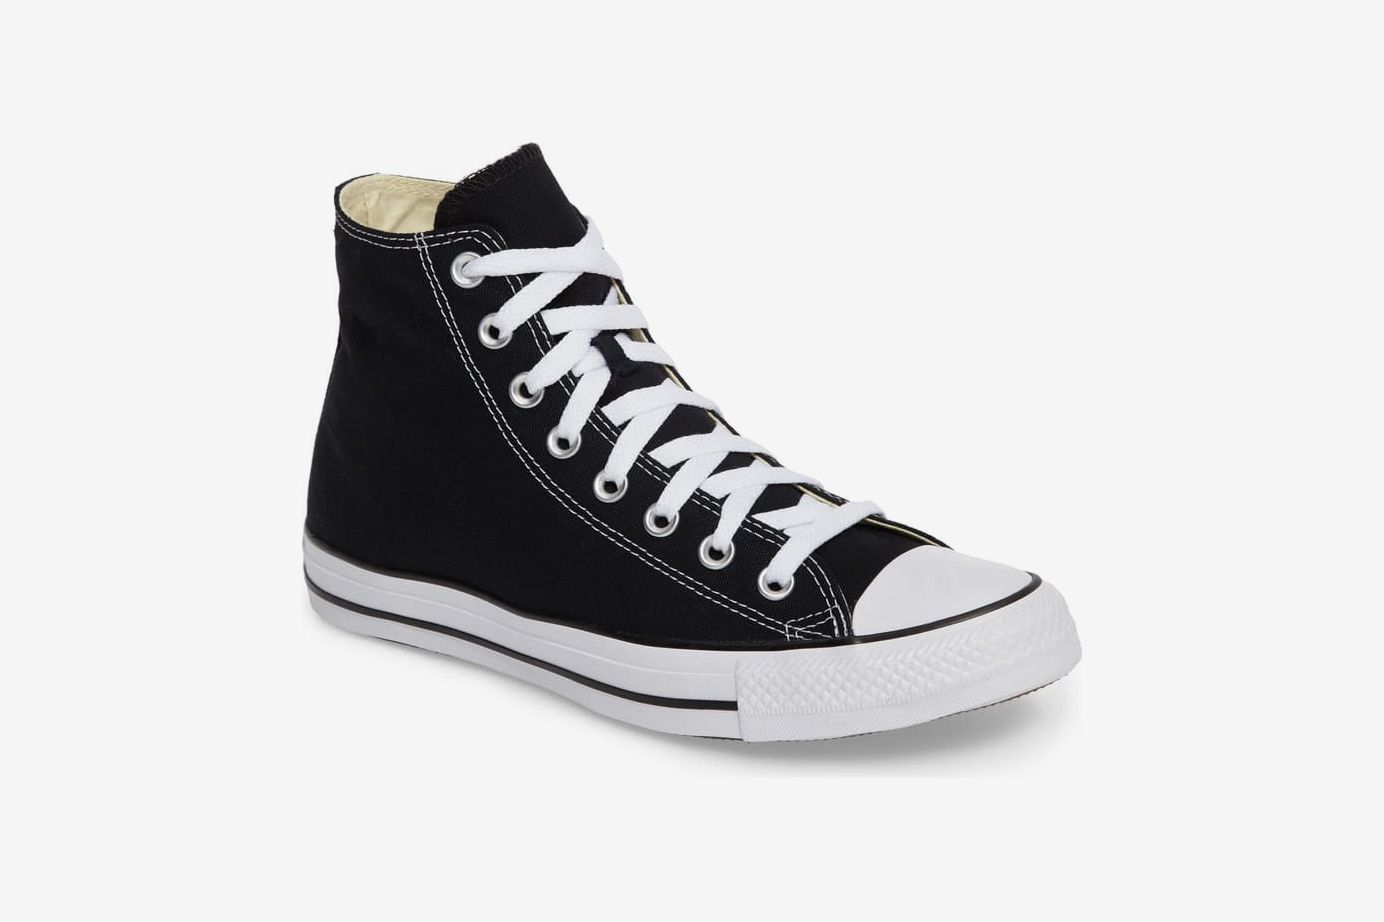 Converse Chuck Taylor High-Top Sneaker on Sale at Nordstrom | The Strategist